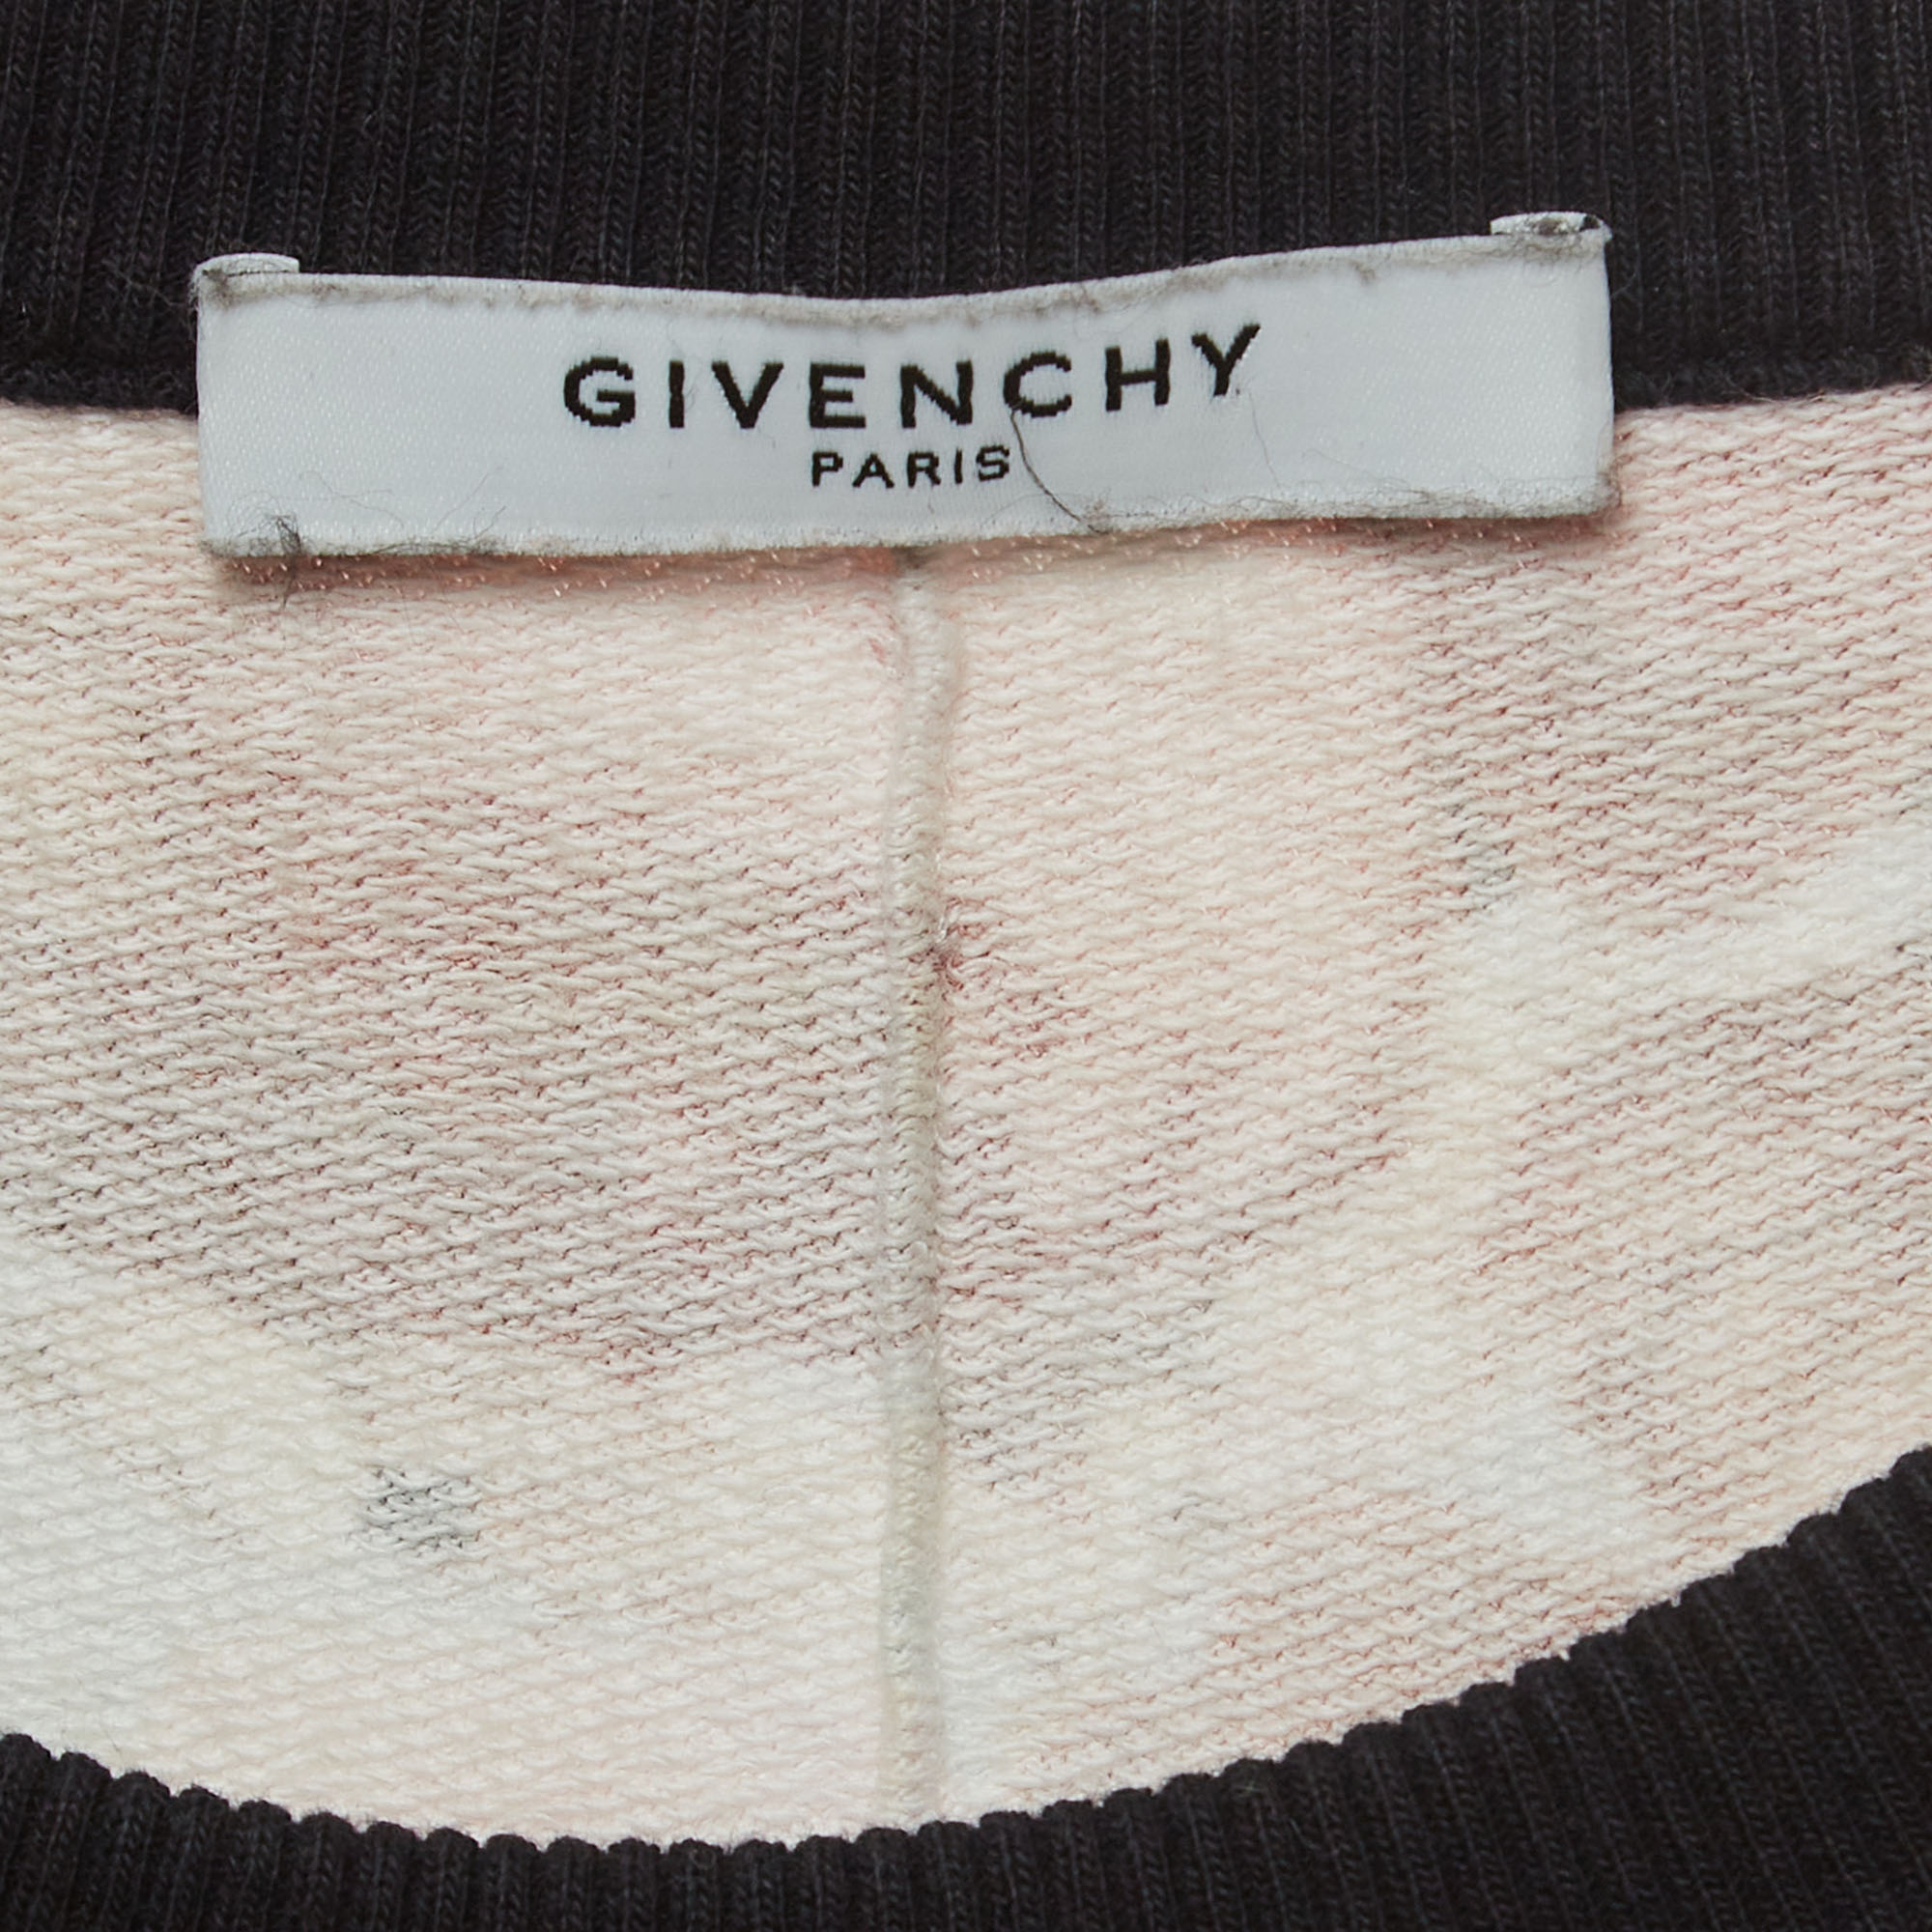 Givenchy Multicolor Roses And Birds Of Paradise Cotton Knit Sweatshirt S